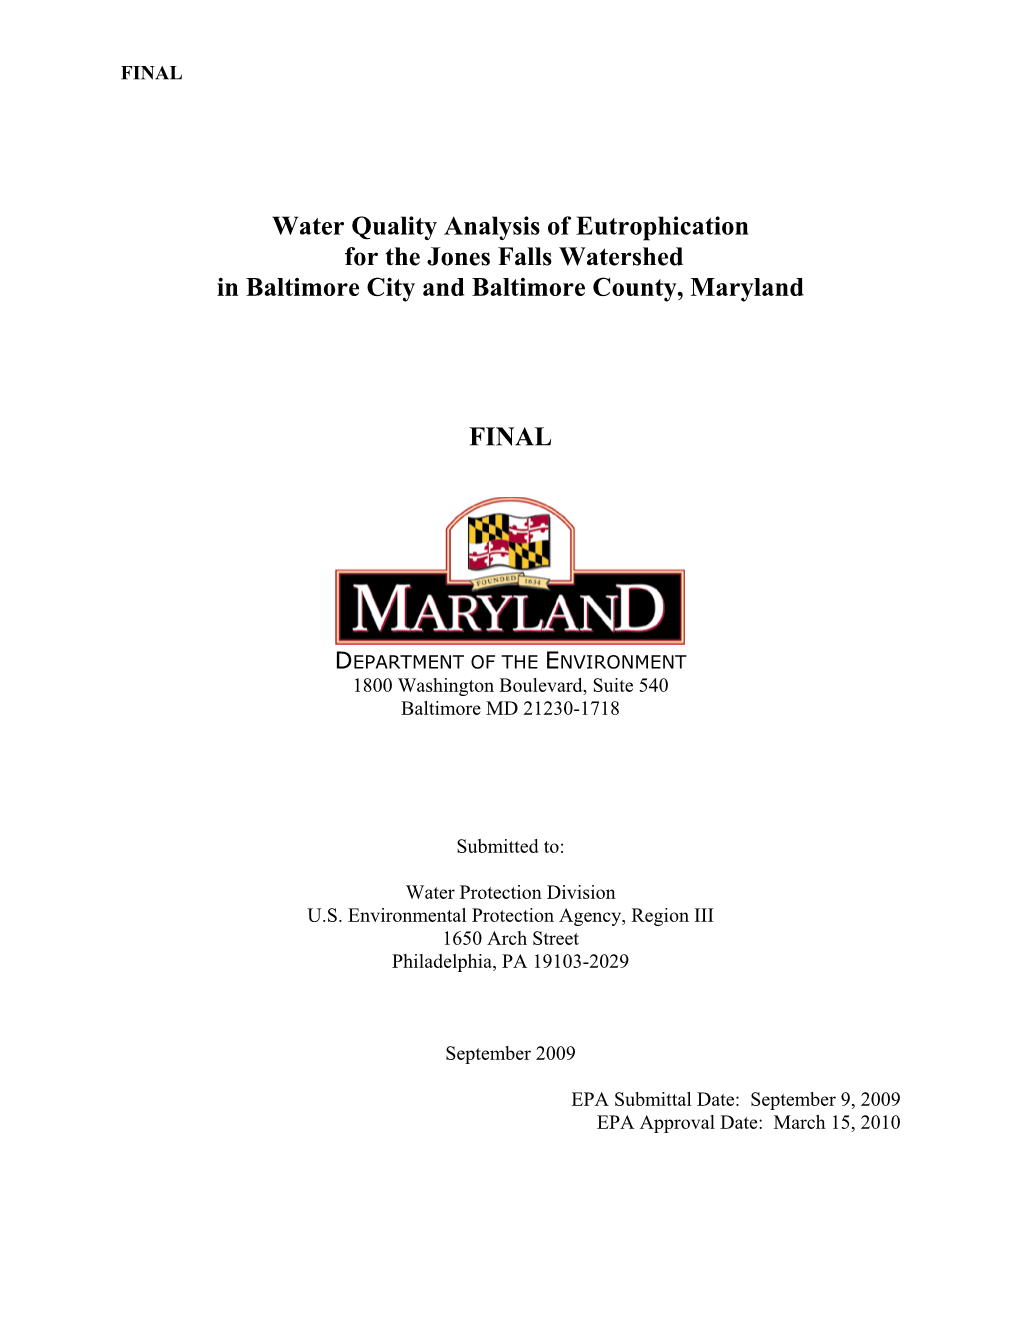 Water Quality Analysis of Eutrophication for the Jones Falls Watershed in Baltimore City and Baltimore County, Maryland